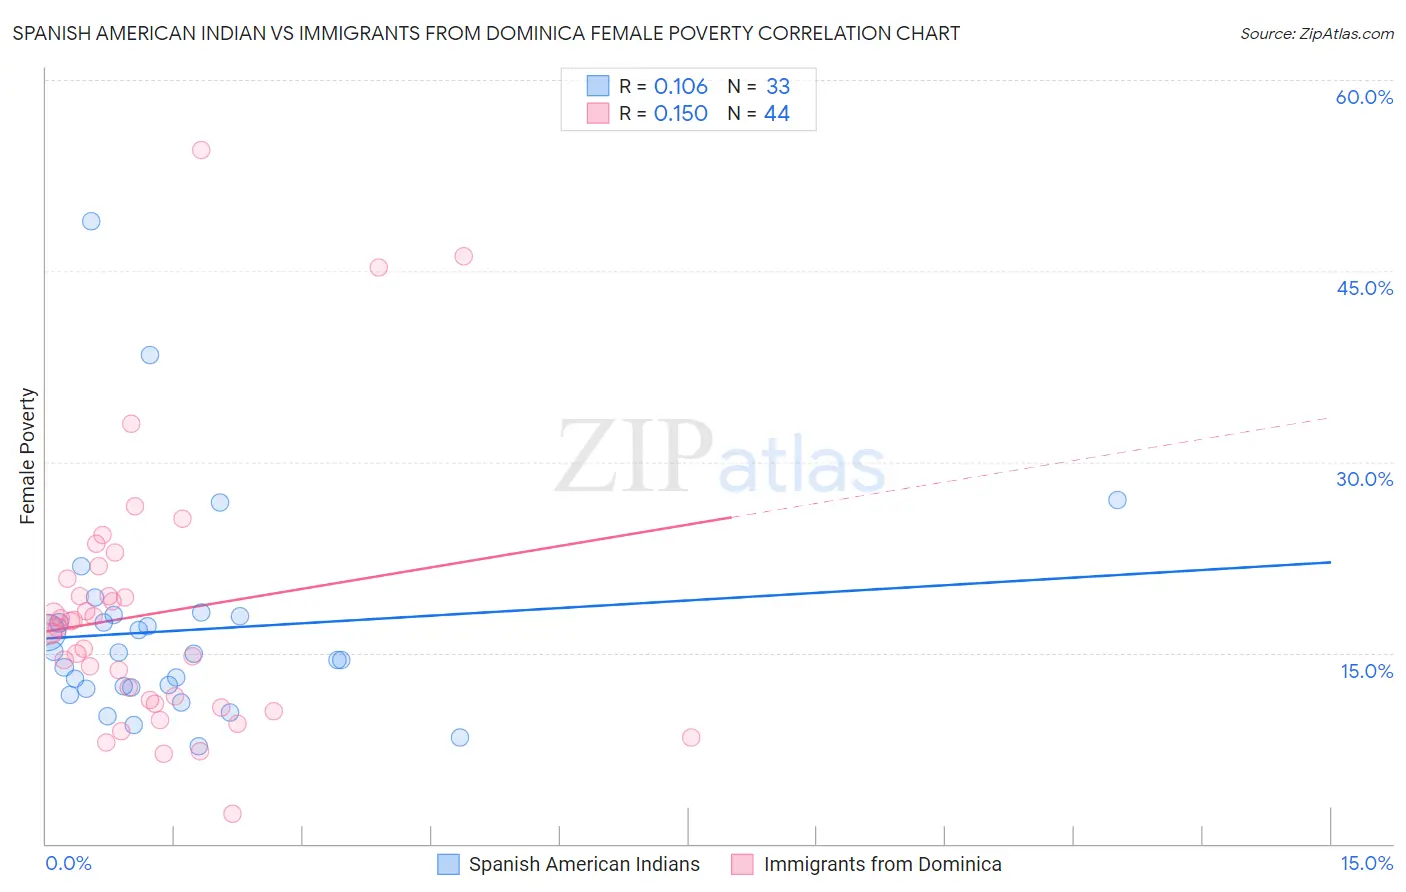 Spanish American Indian vs Immigrants from Dominica Female Poverty